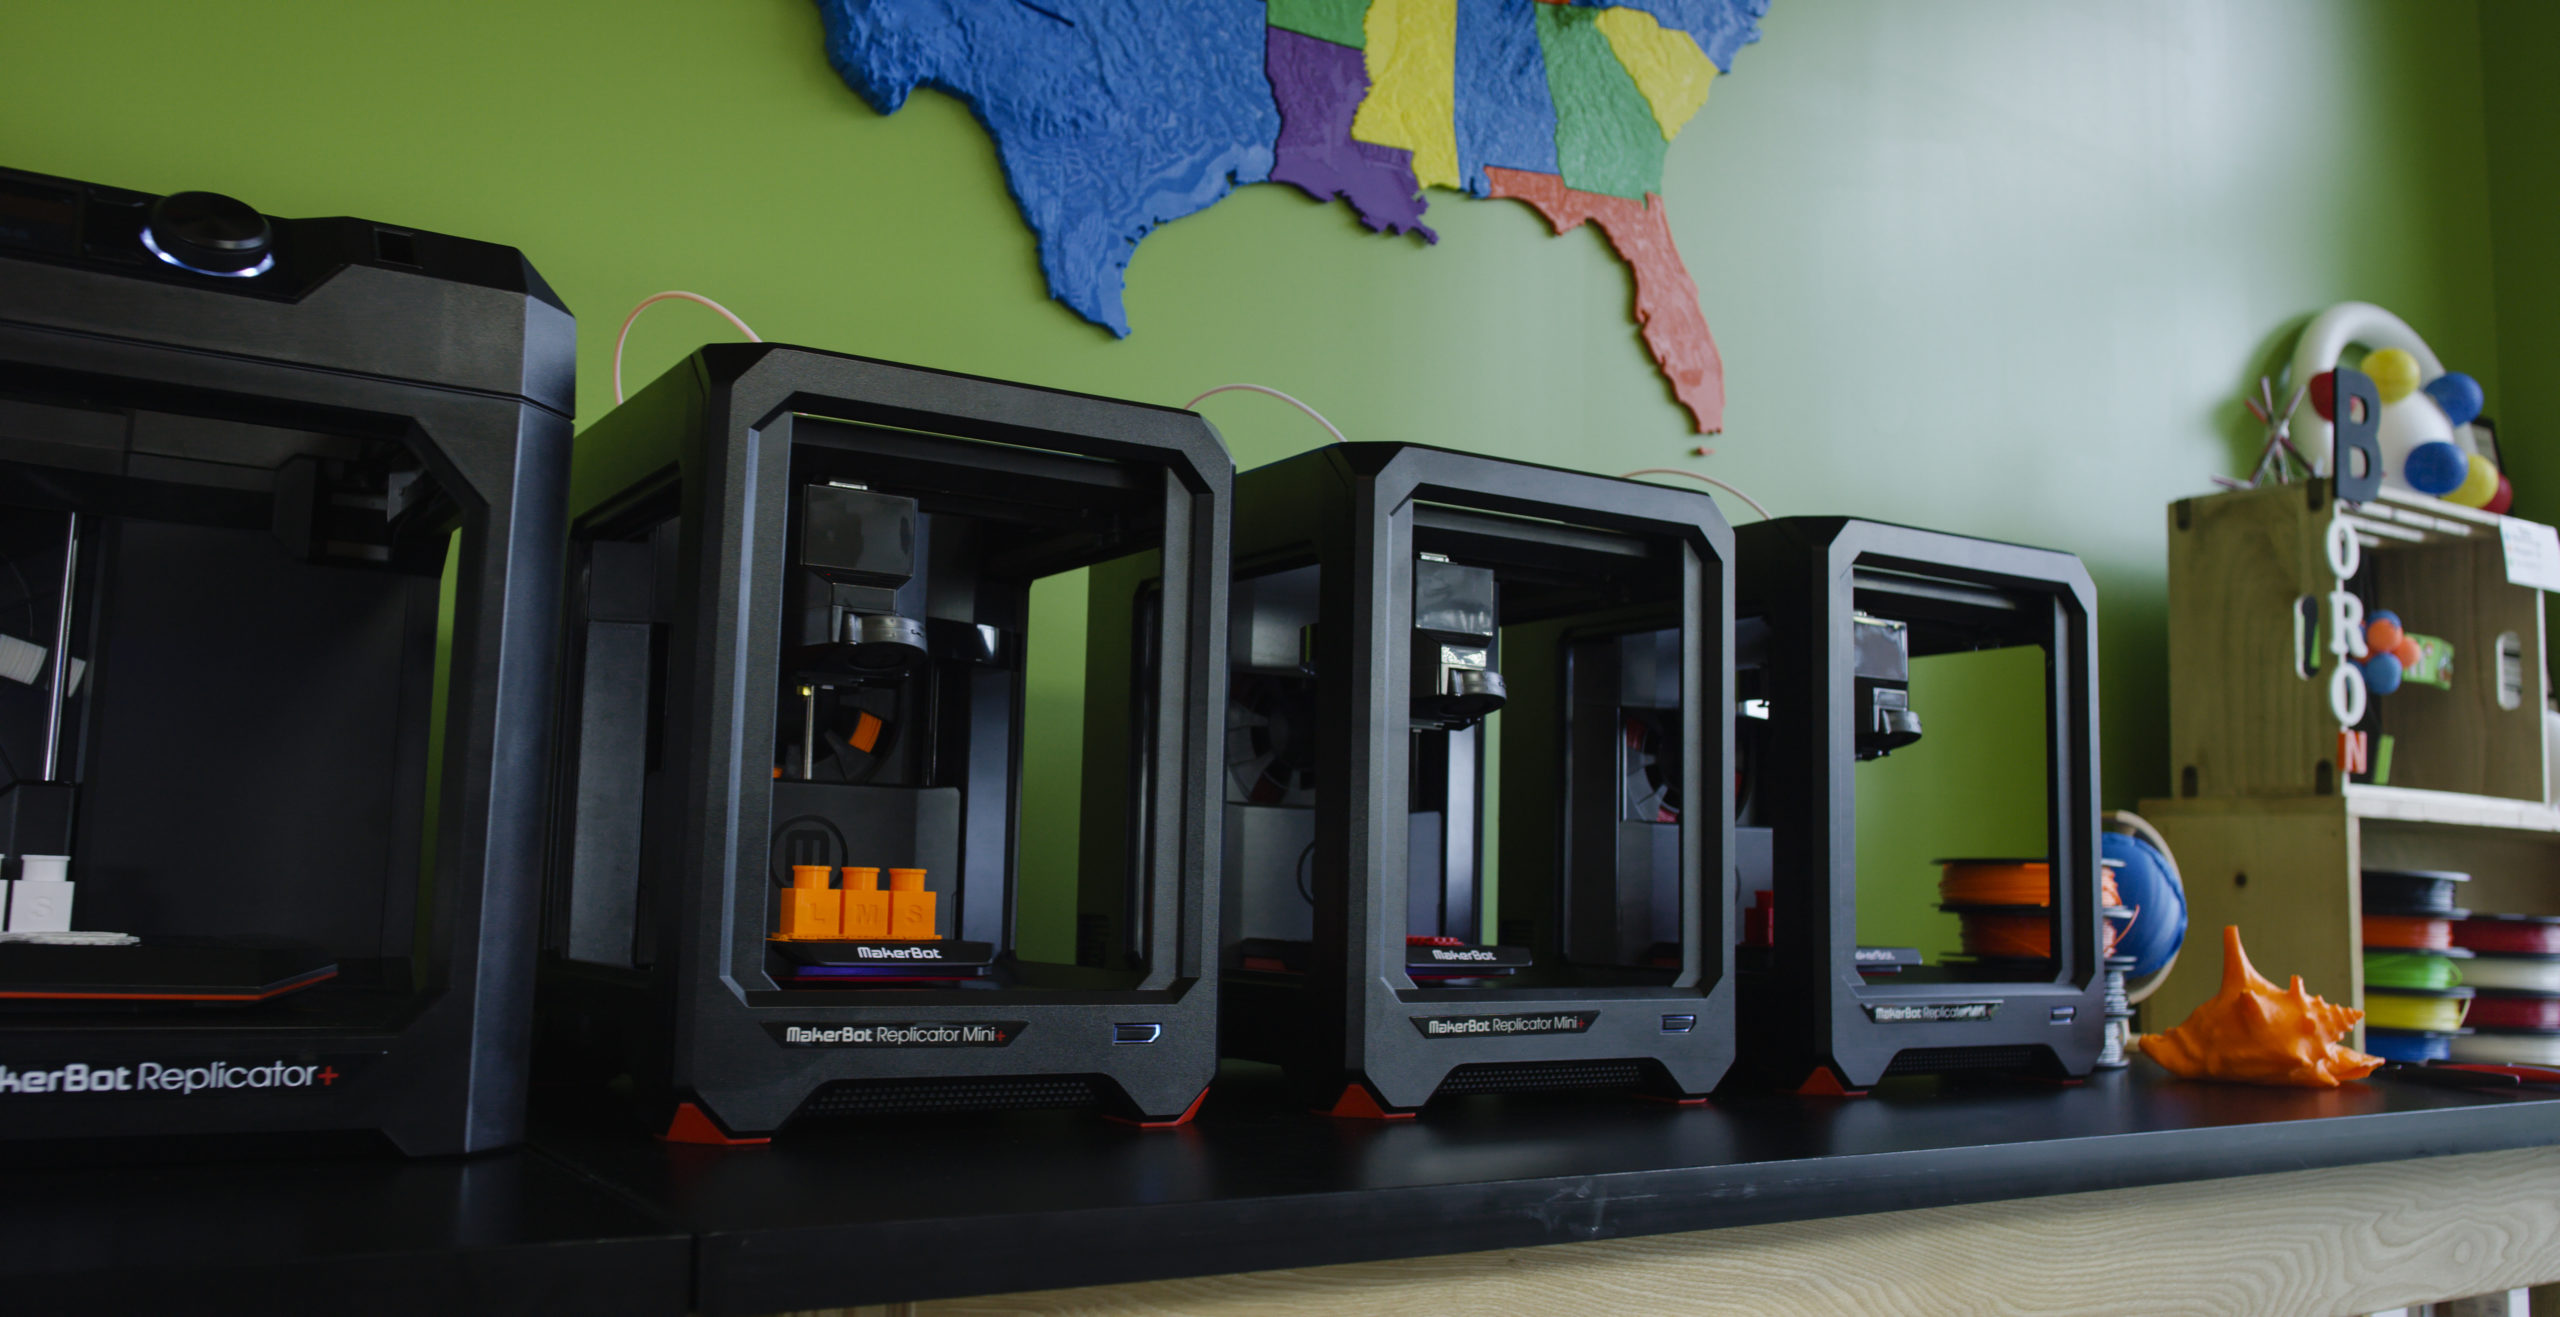 Home 3D Printing ‘Just Not There Yet’ Admits MakerBot